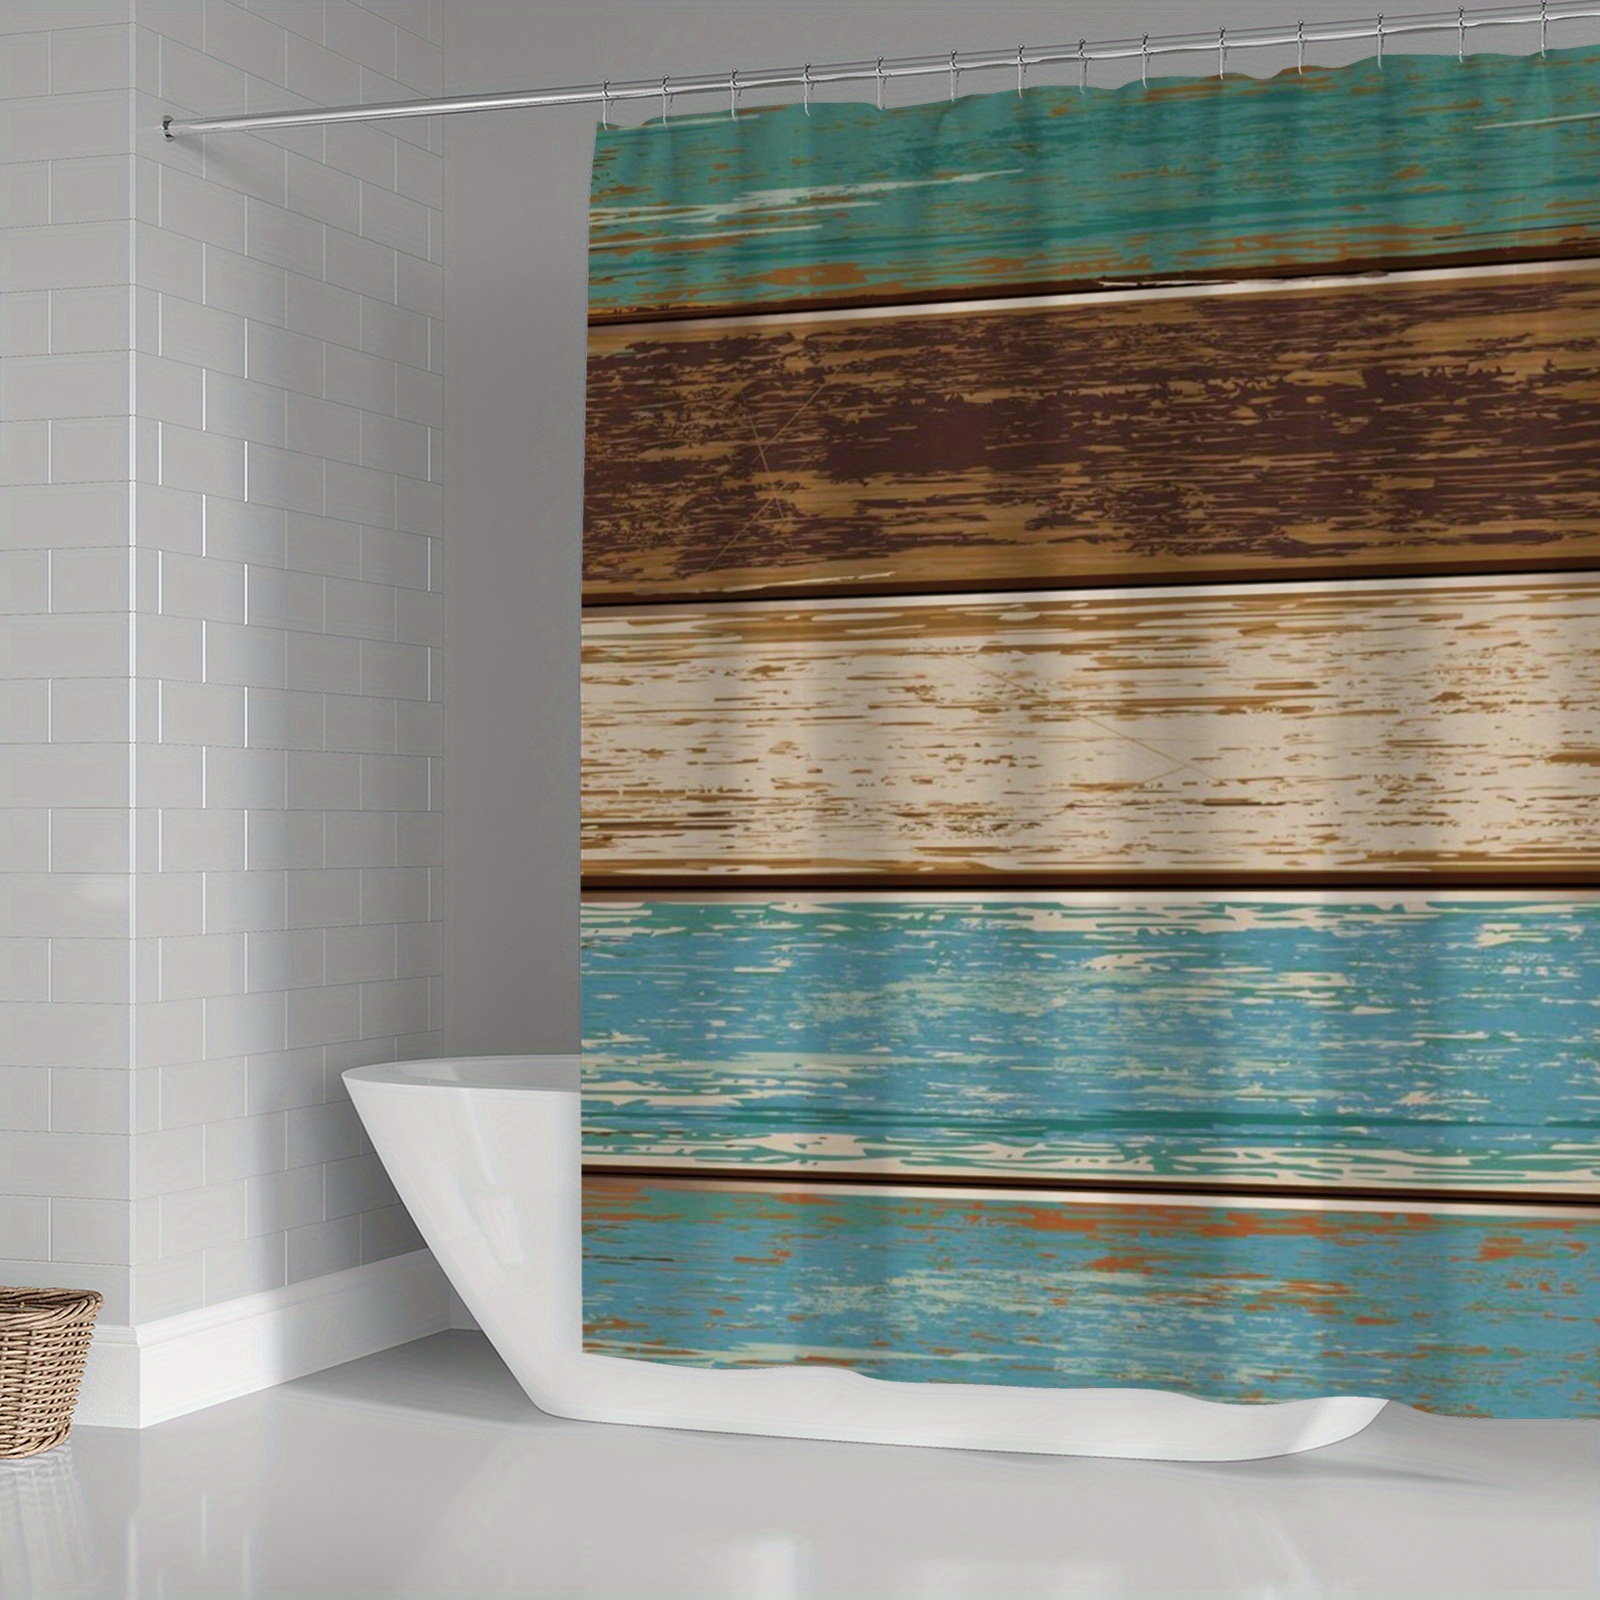 Rustic Wood Panel Brown Plank Fence Shower Curtain And Bath Mat Set  Waterproof Polyester Bathroom Fabric For Bathtub Decor